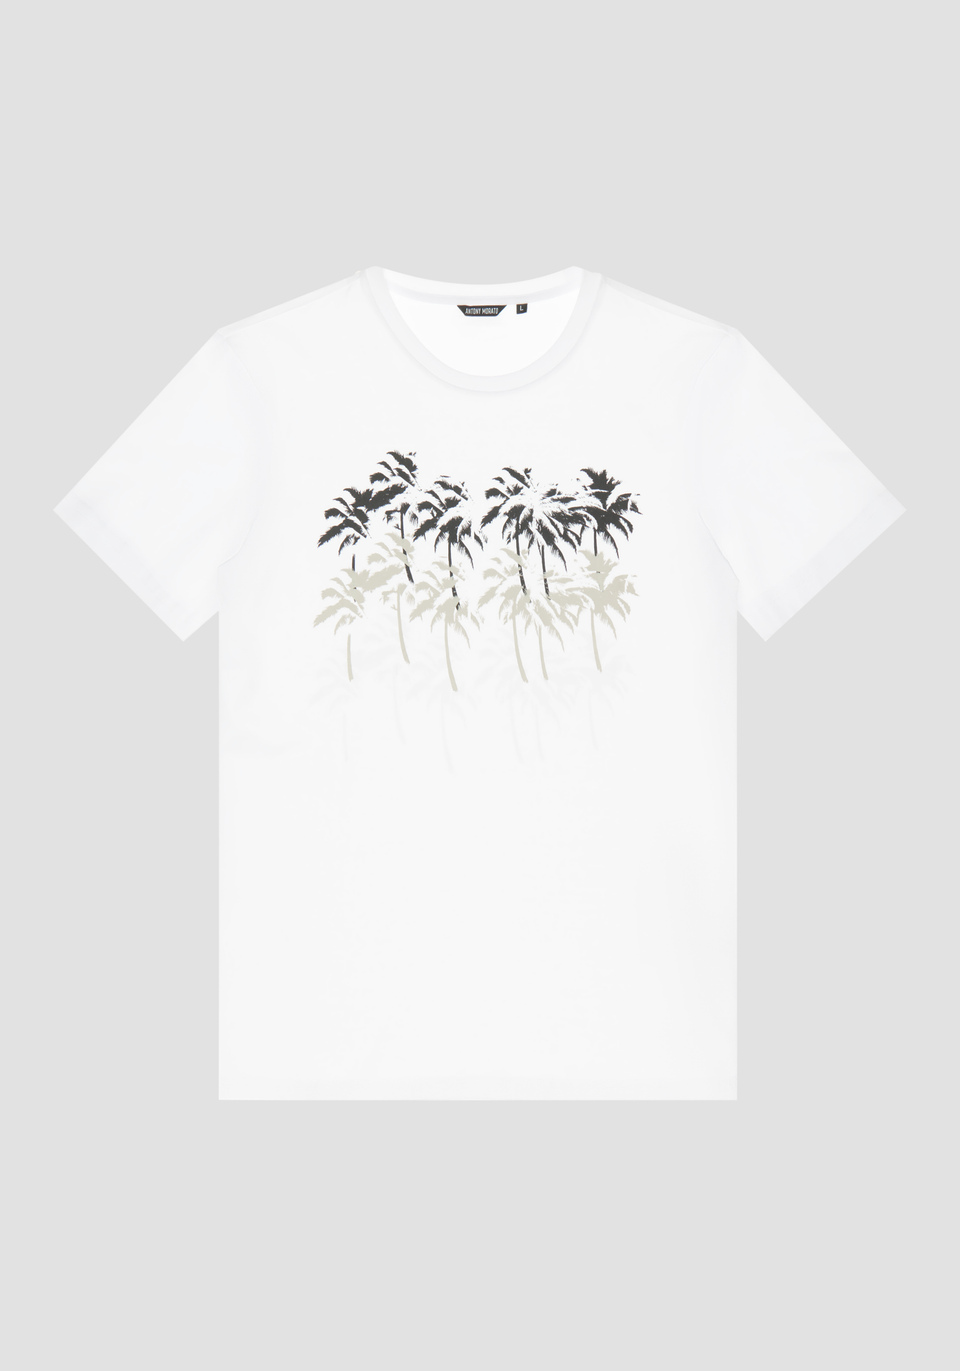 SLIM-FIT T-SHIRT IN 100% COTTON WITH PALM-TREE PRINT - Antony Morato Online Shop